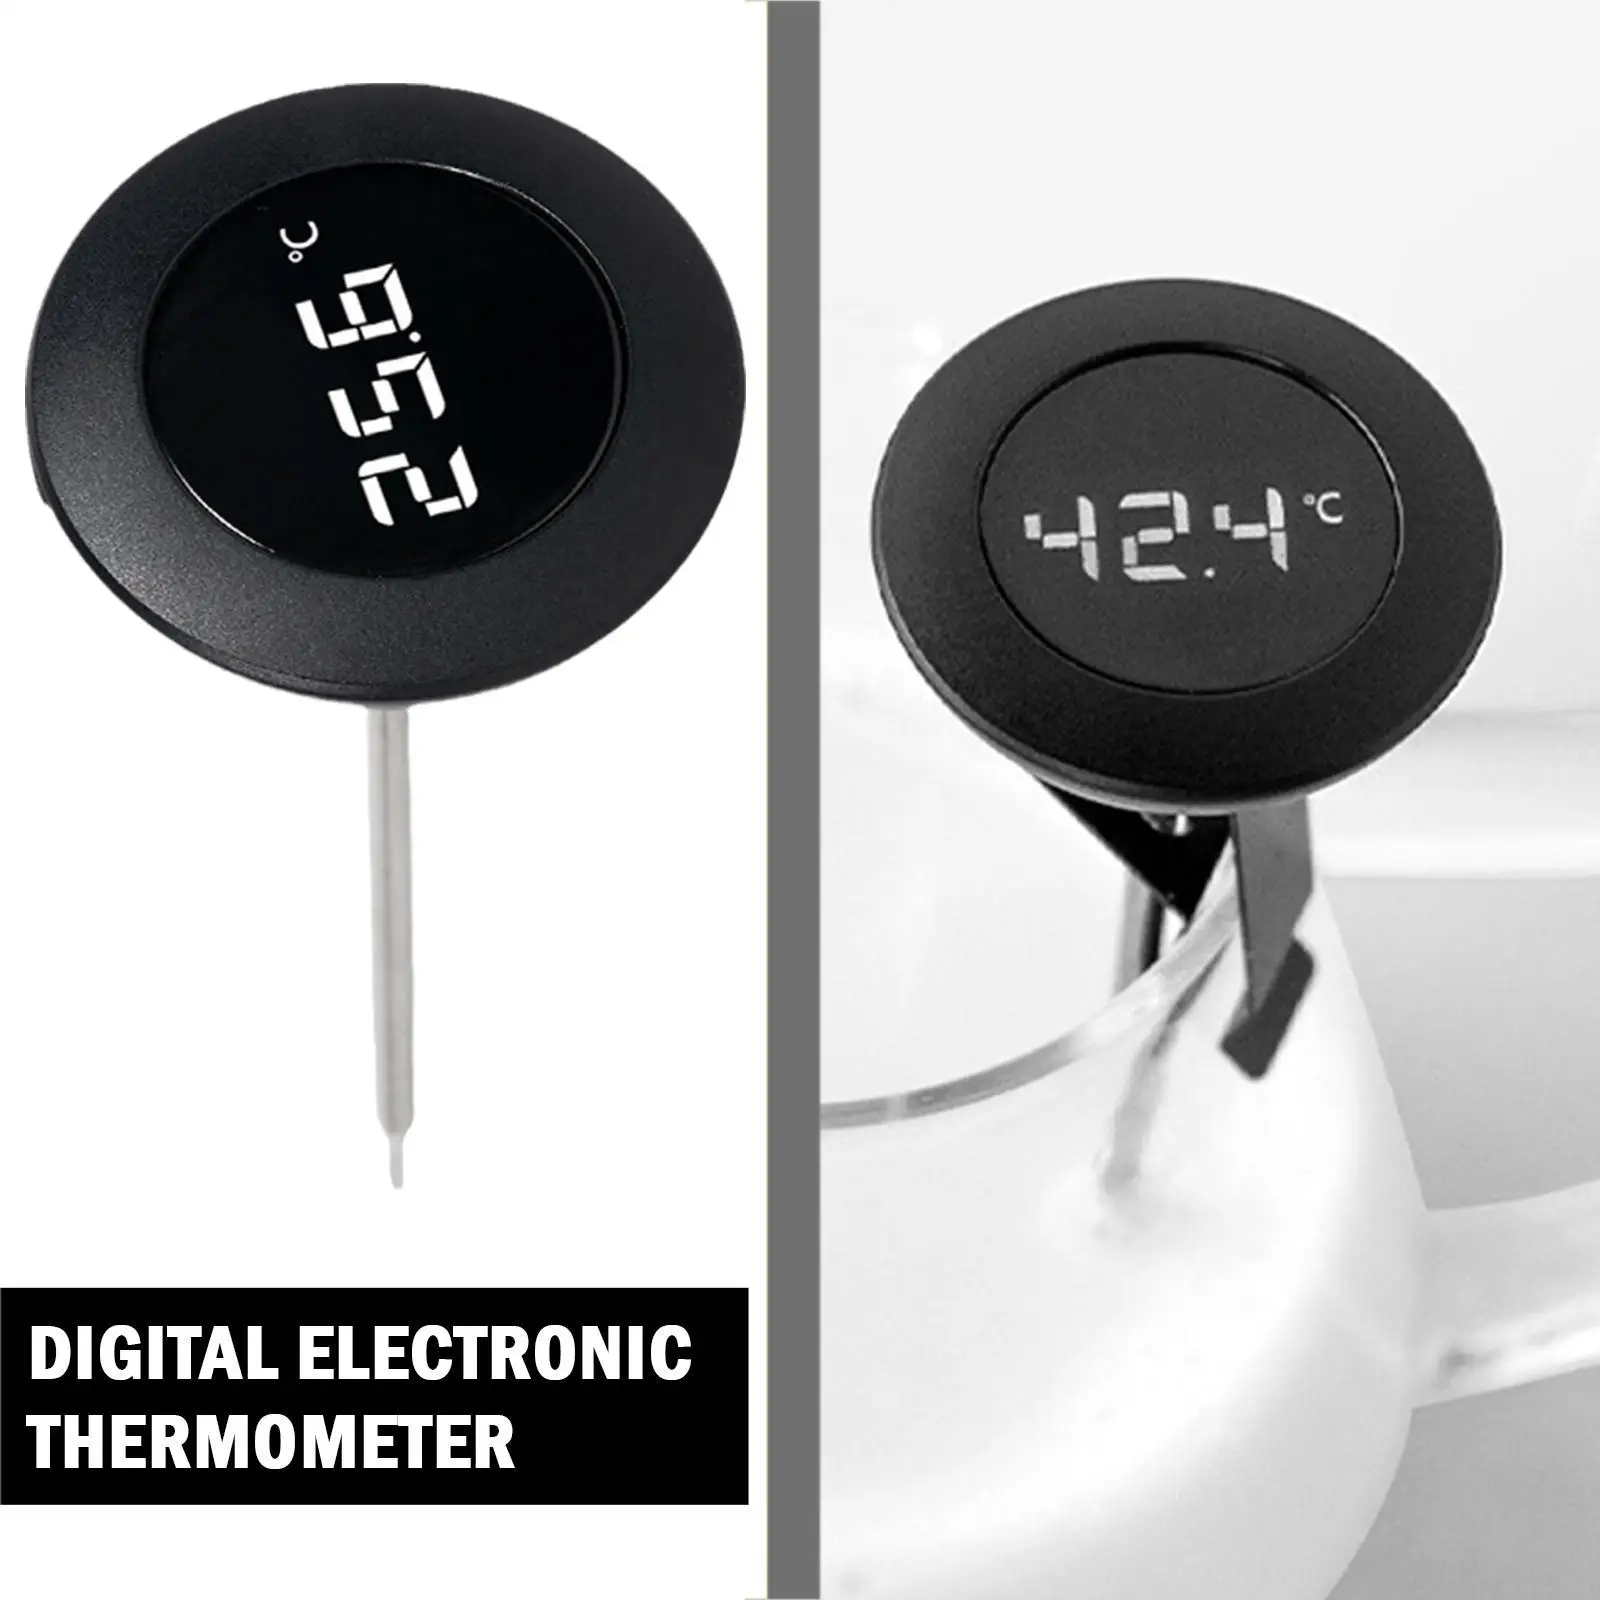 

NEW 1pc Timemore Digital little T LCD display thermo detertor coffee thermometer coffee Latte Art maker tools Portable thermome